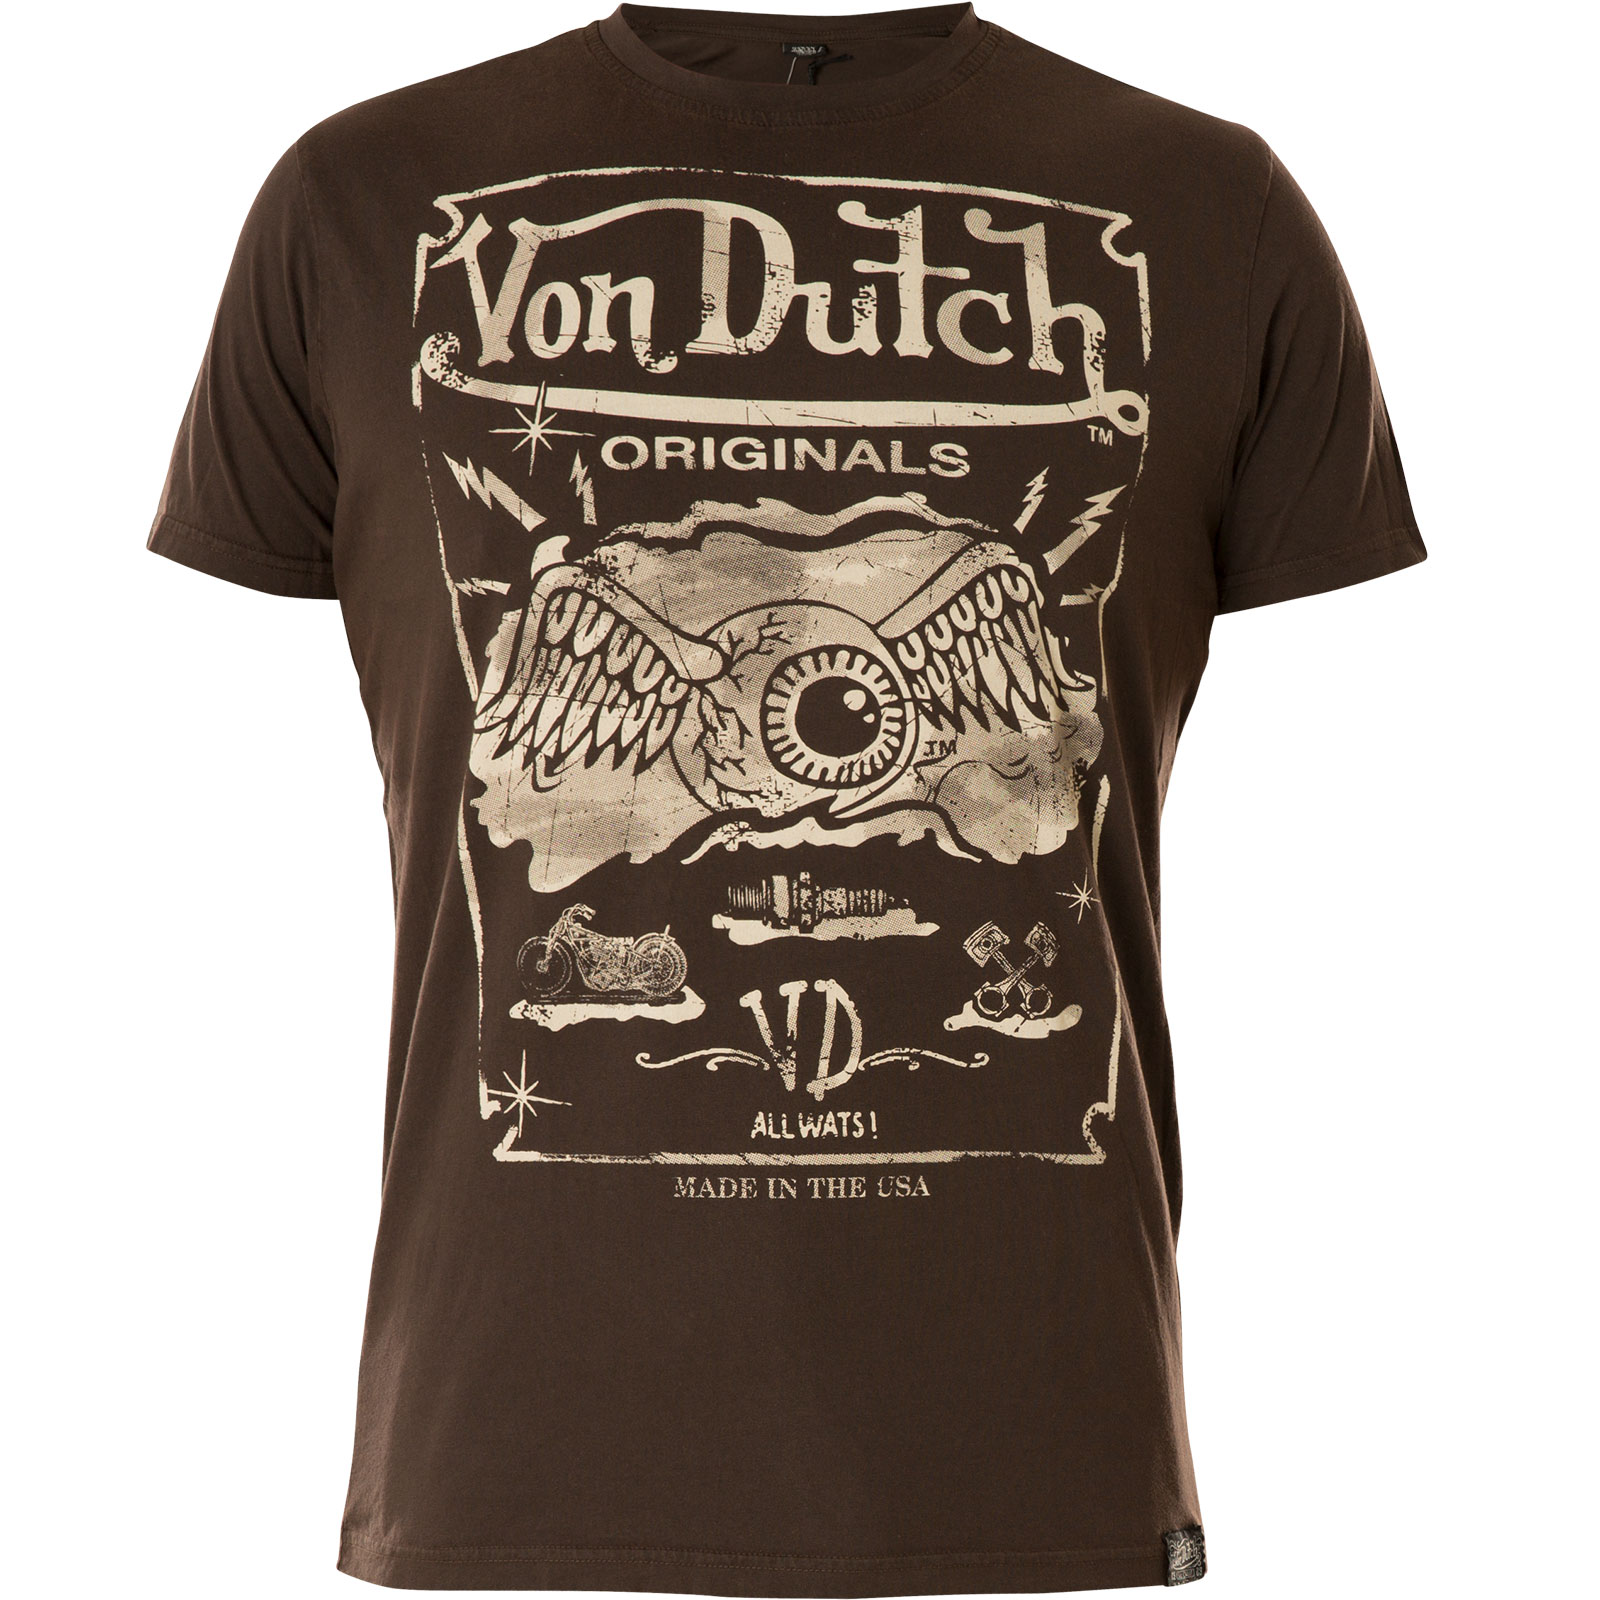 Von Dutch T-Shirt Eyball in brown Print of a winged eye and lettering